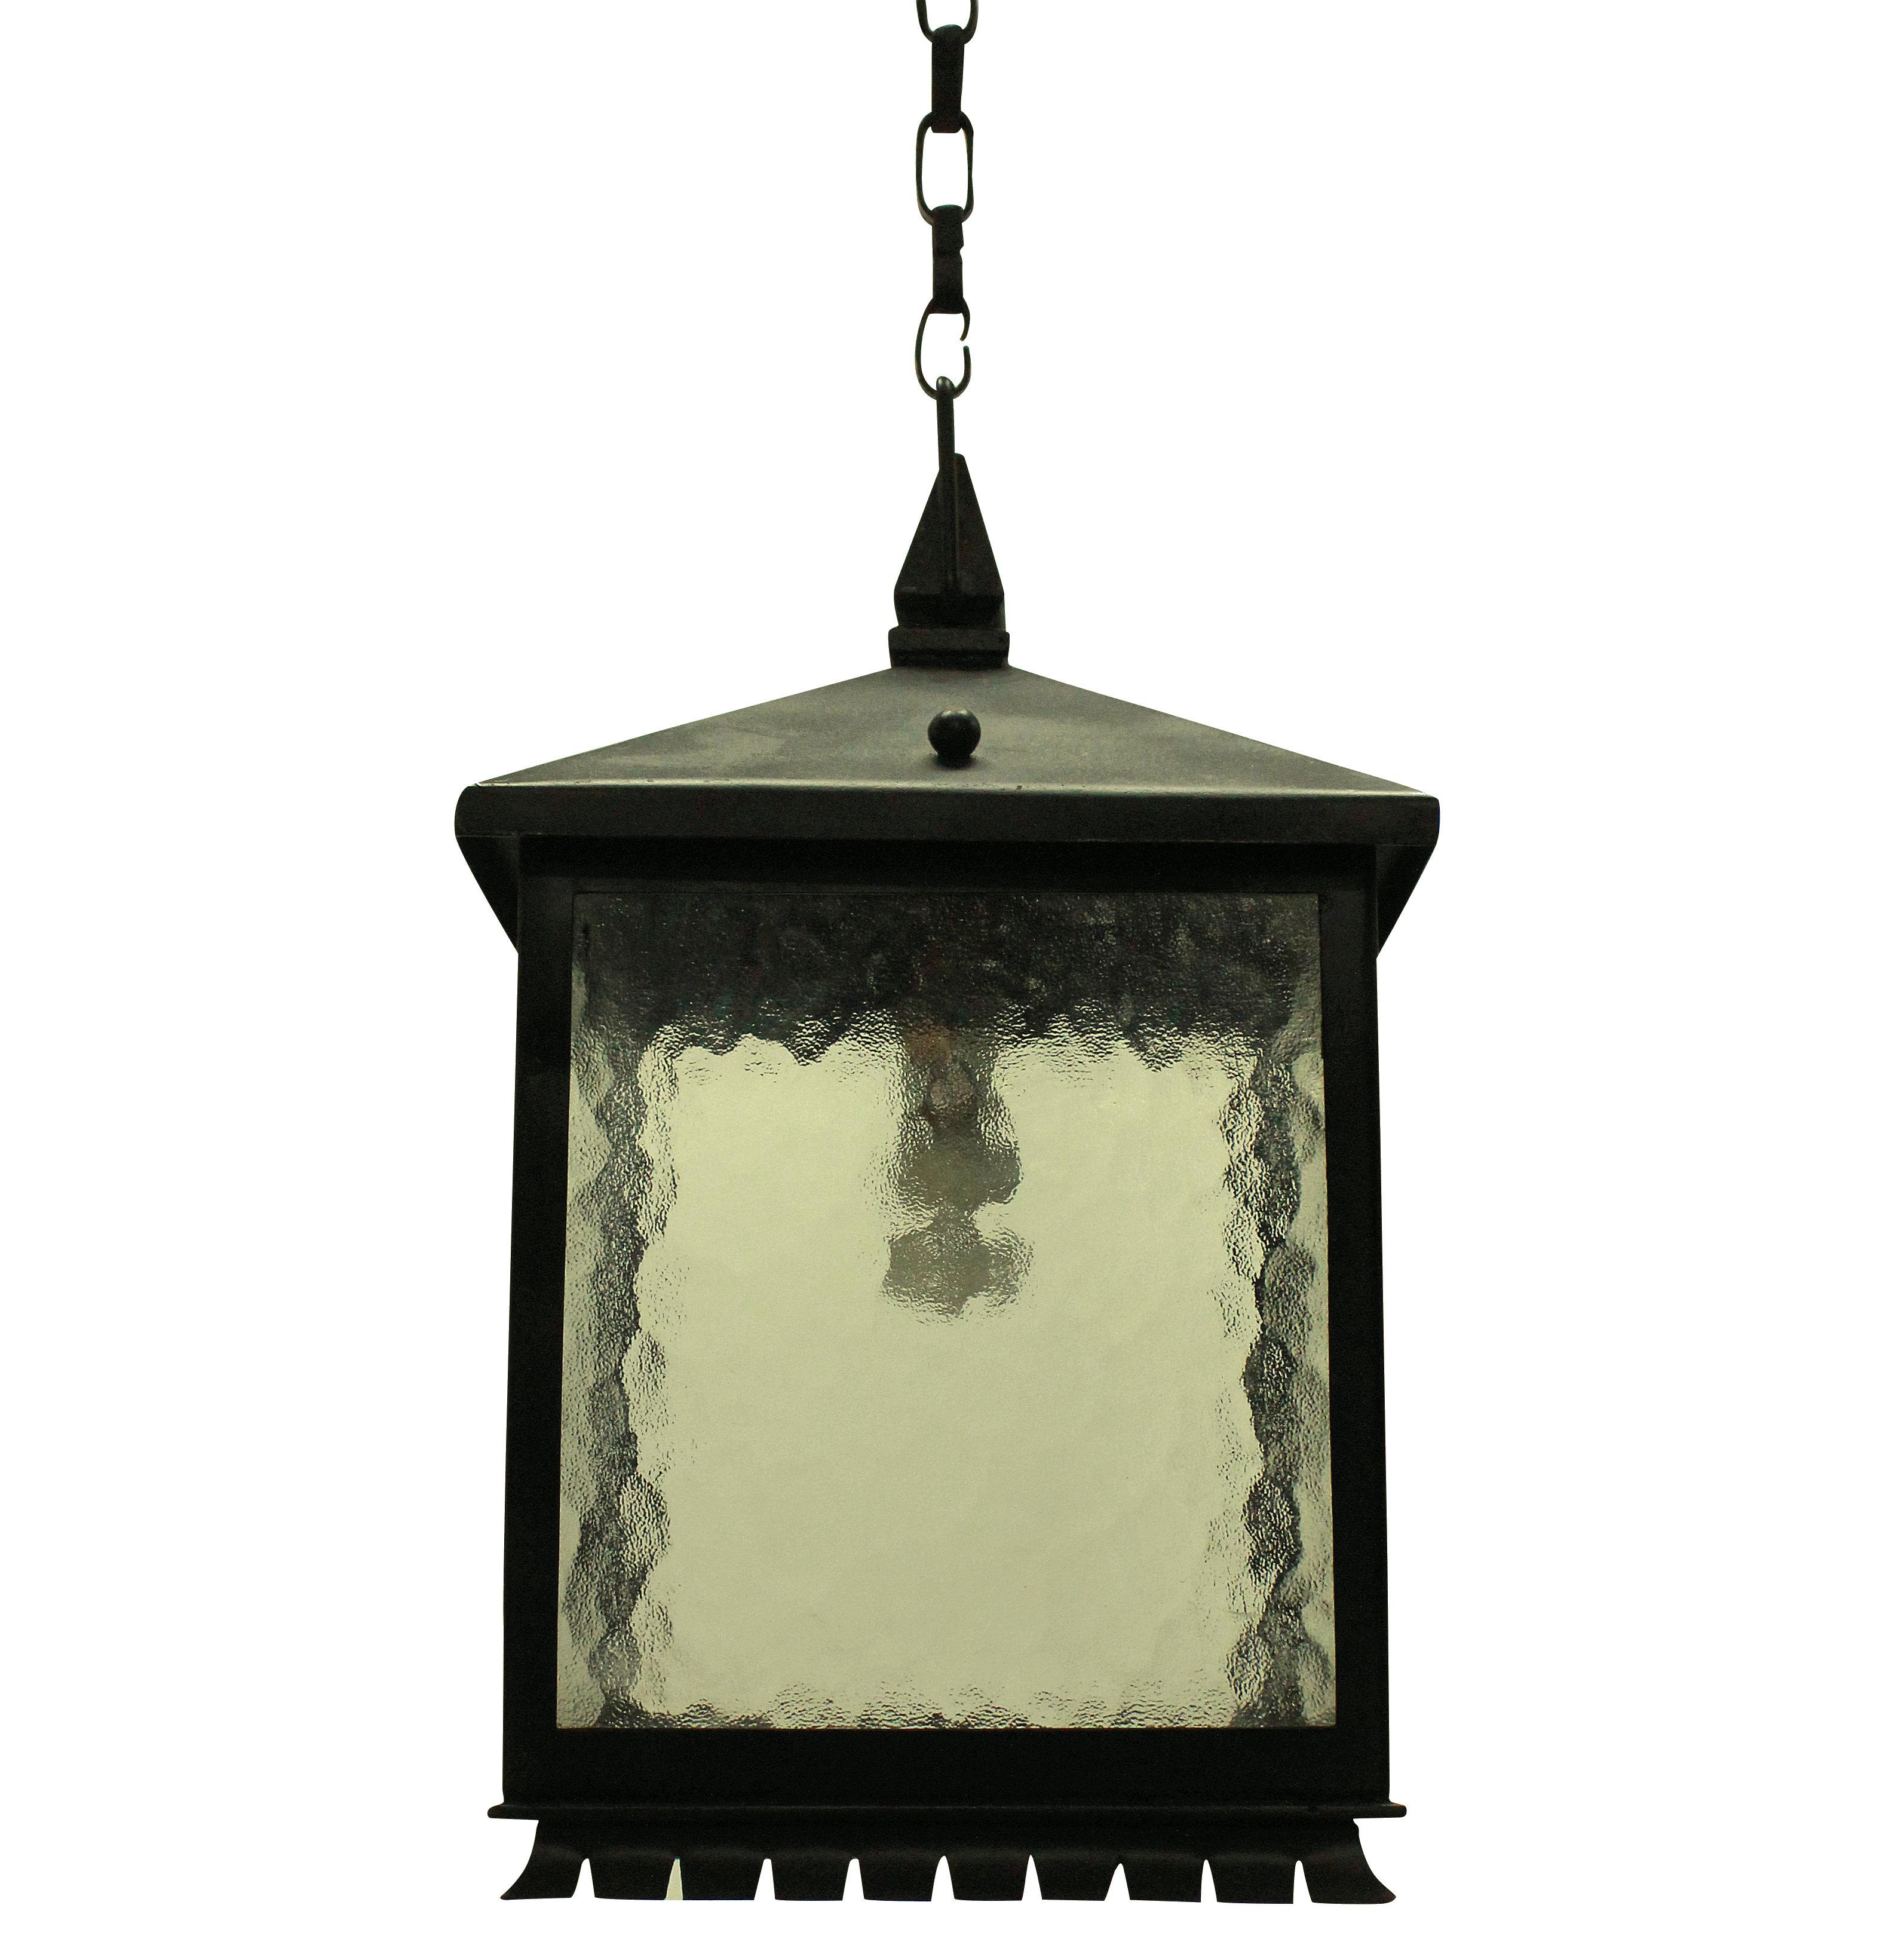 A pair of English wrought iron lanterns of square design with a pagoda roof and glass panels.